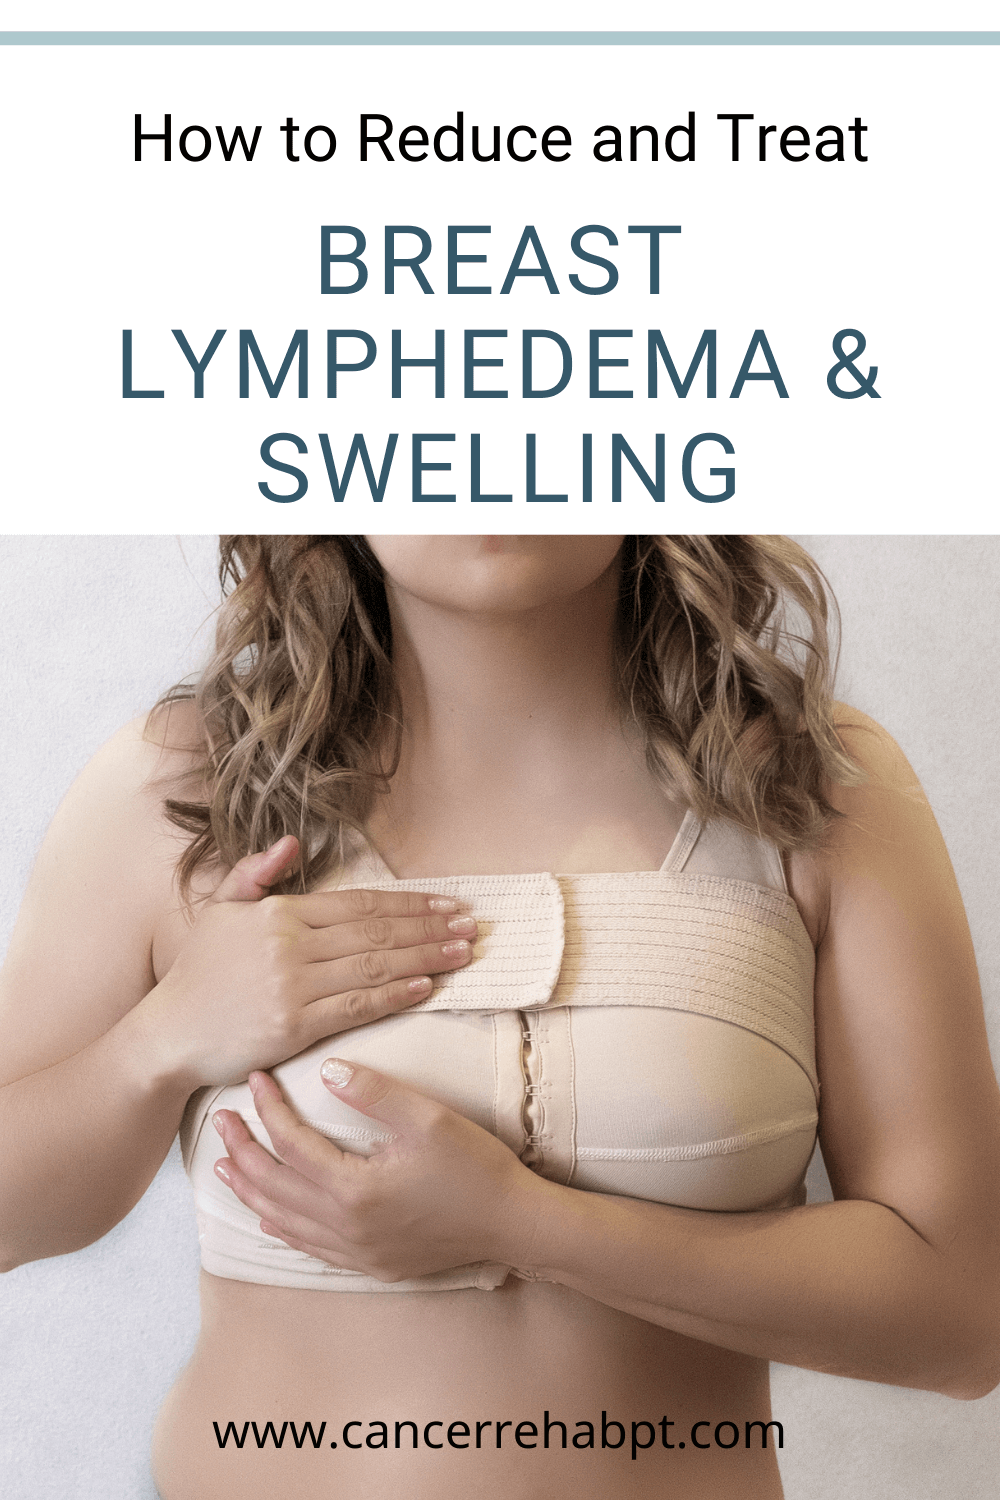 Cancer Rehab PT — How to Reduce and Treat Chest and Breast Lymphedema and  Swelling